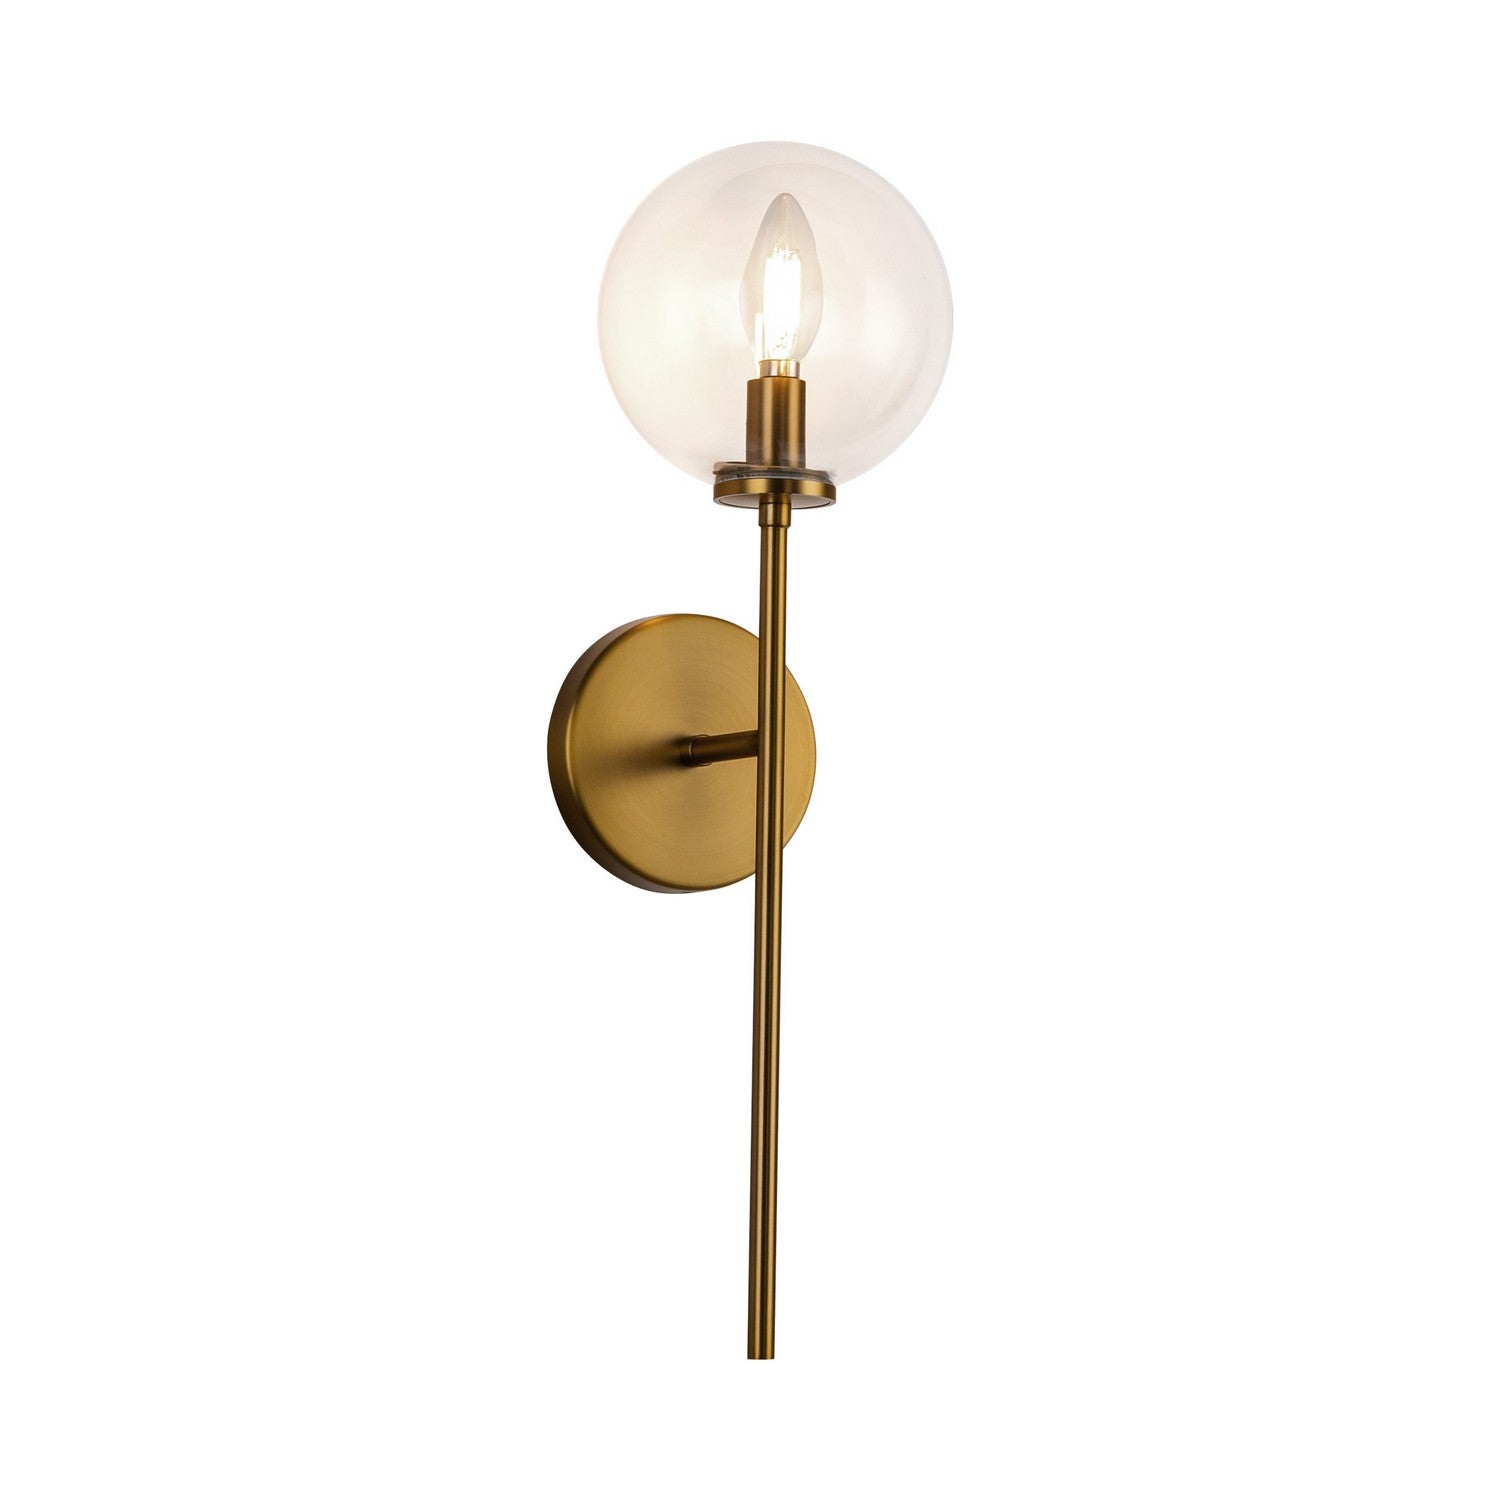 Alora Canada - WV549101AGCL - One Light Wall Vanity - Cassia - Aged Brass/Clear Glass